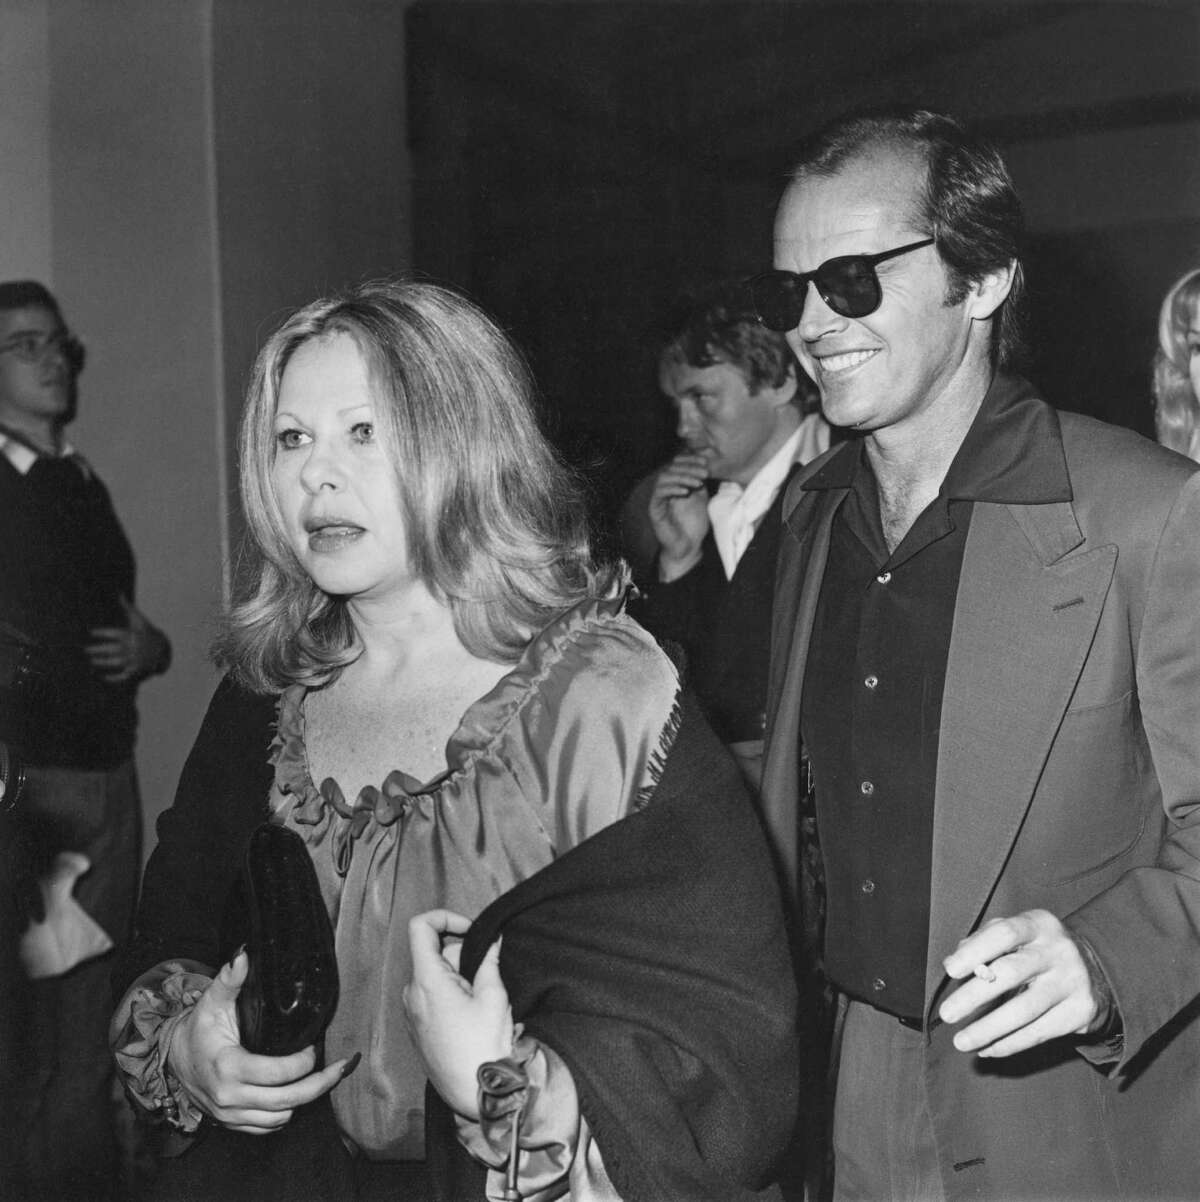 Hollywood talent agent Sue Mengers and actor Jack Nicholson, whom she represented, attend a screening of “Black Sunday” in 1977.